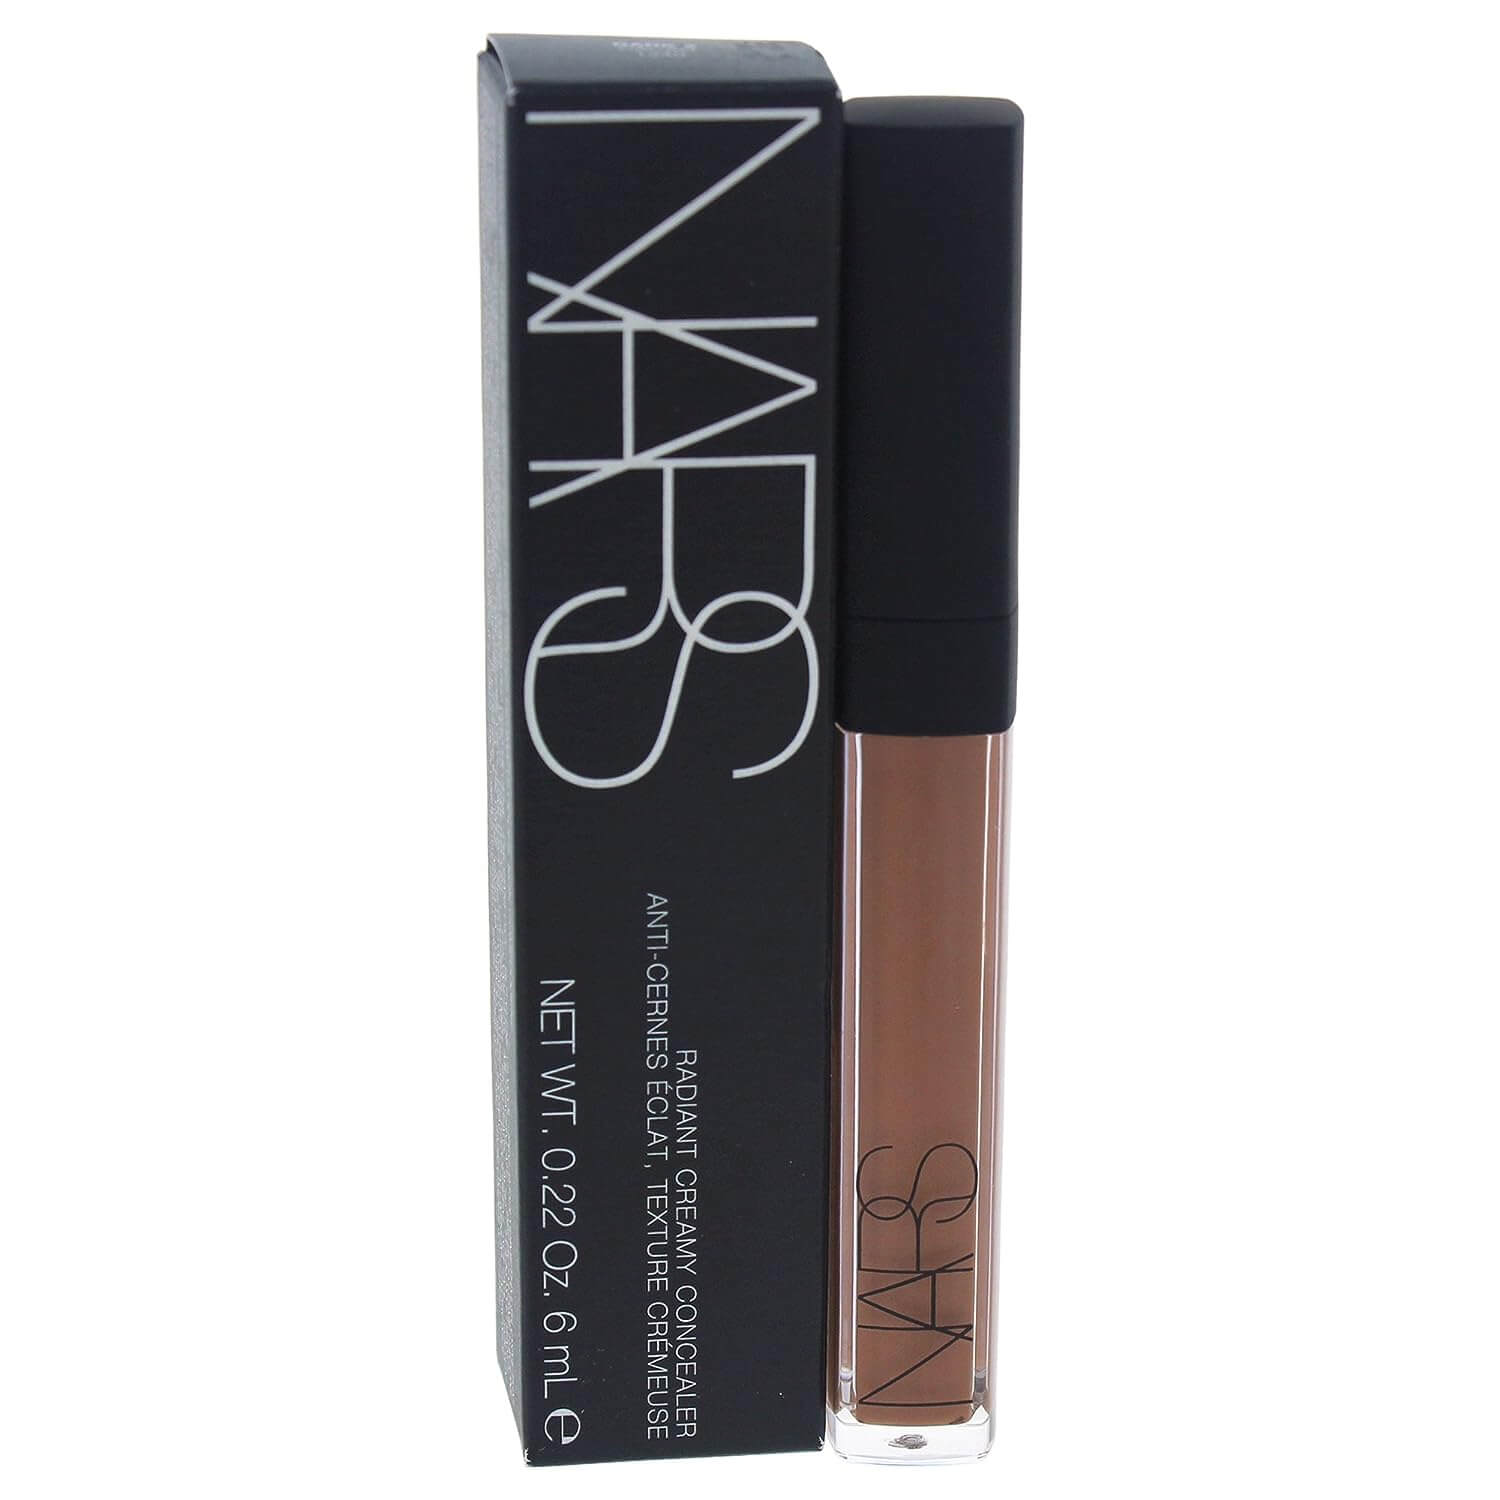 NARS Radiant Creamy Concealer in Cacao